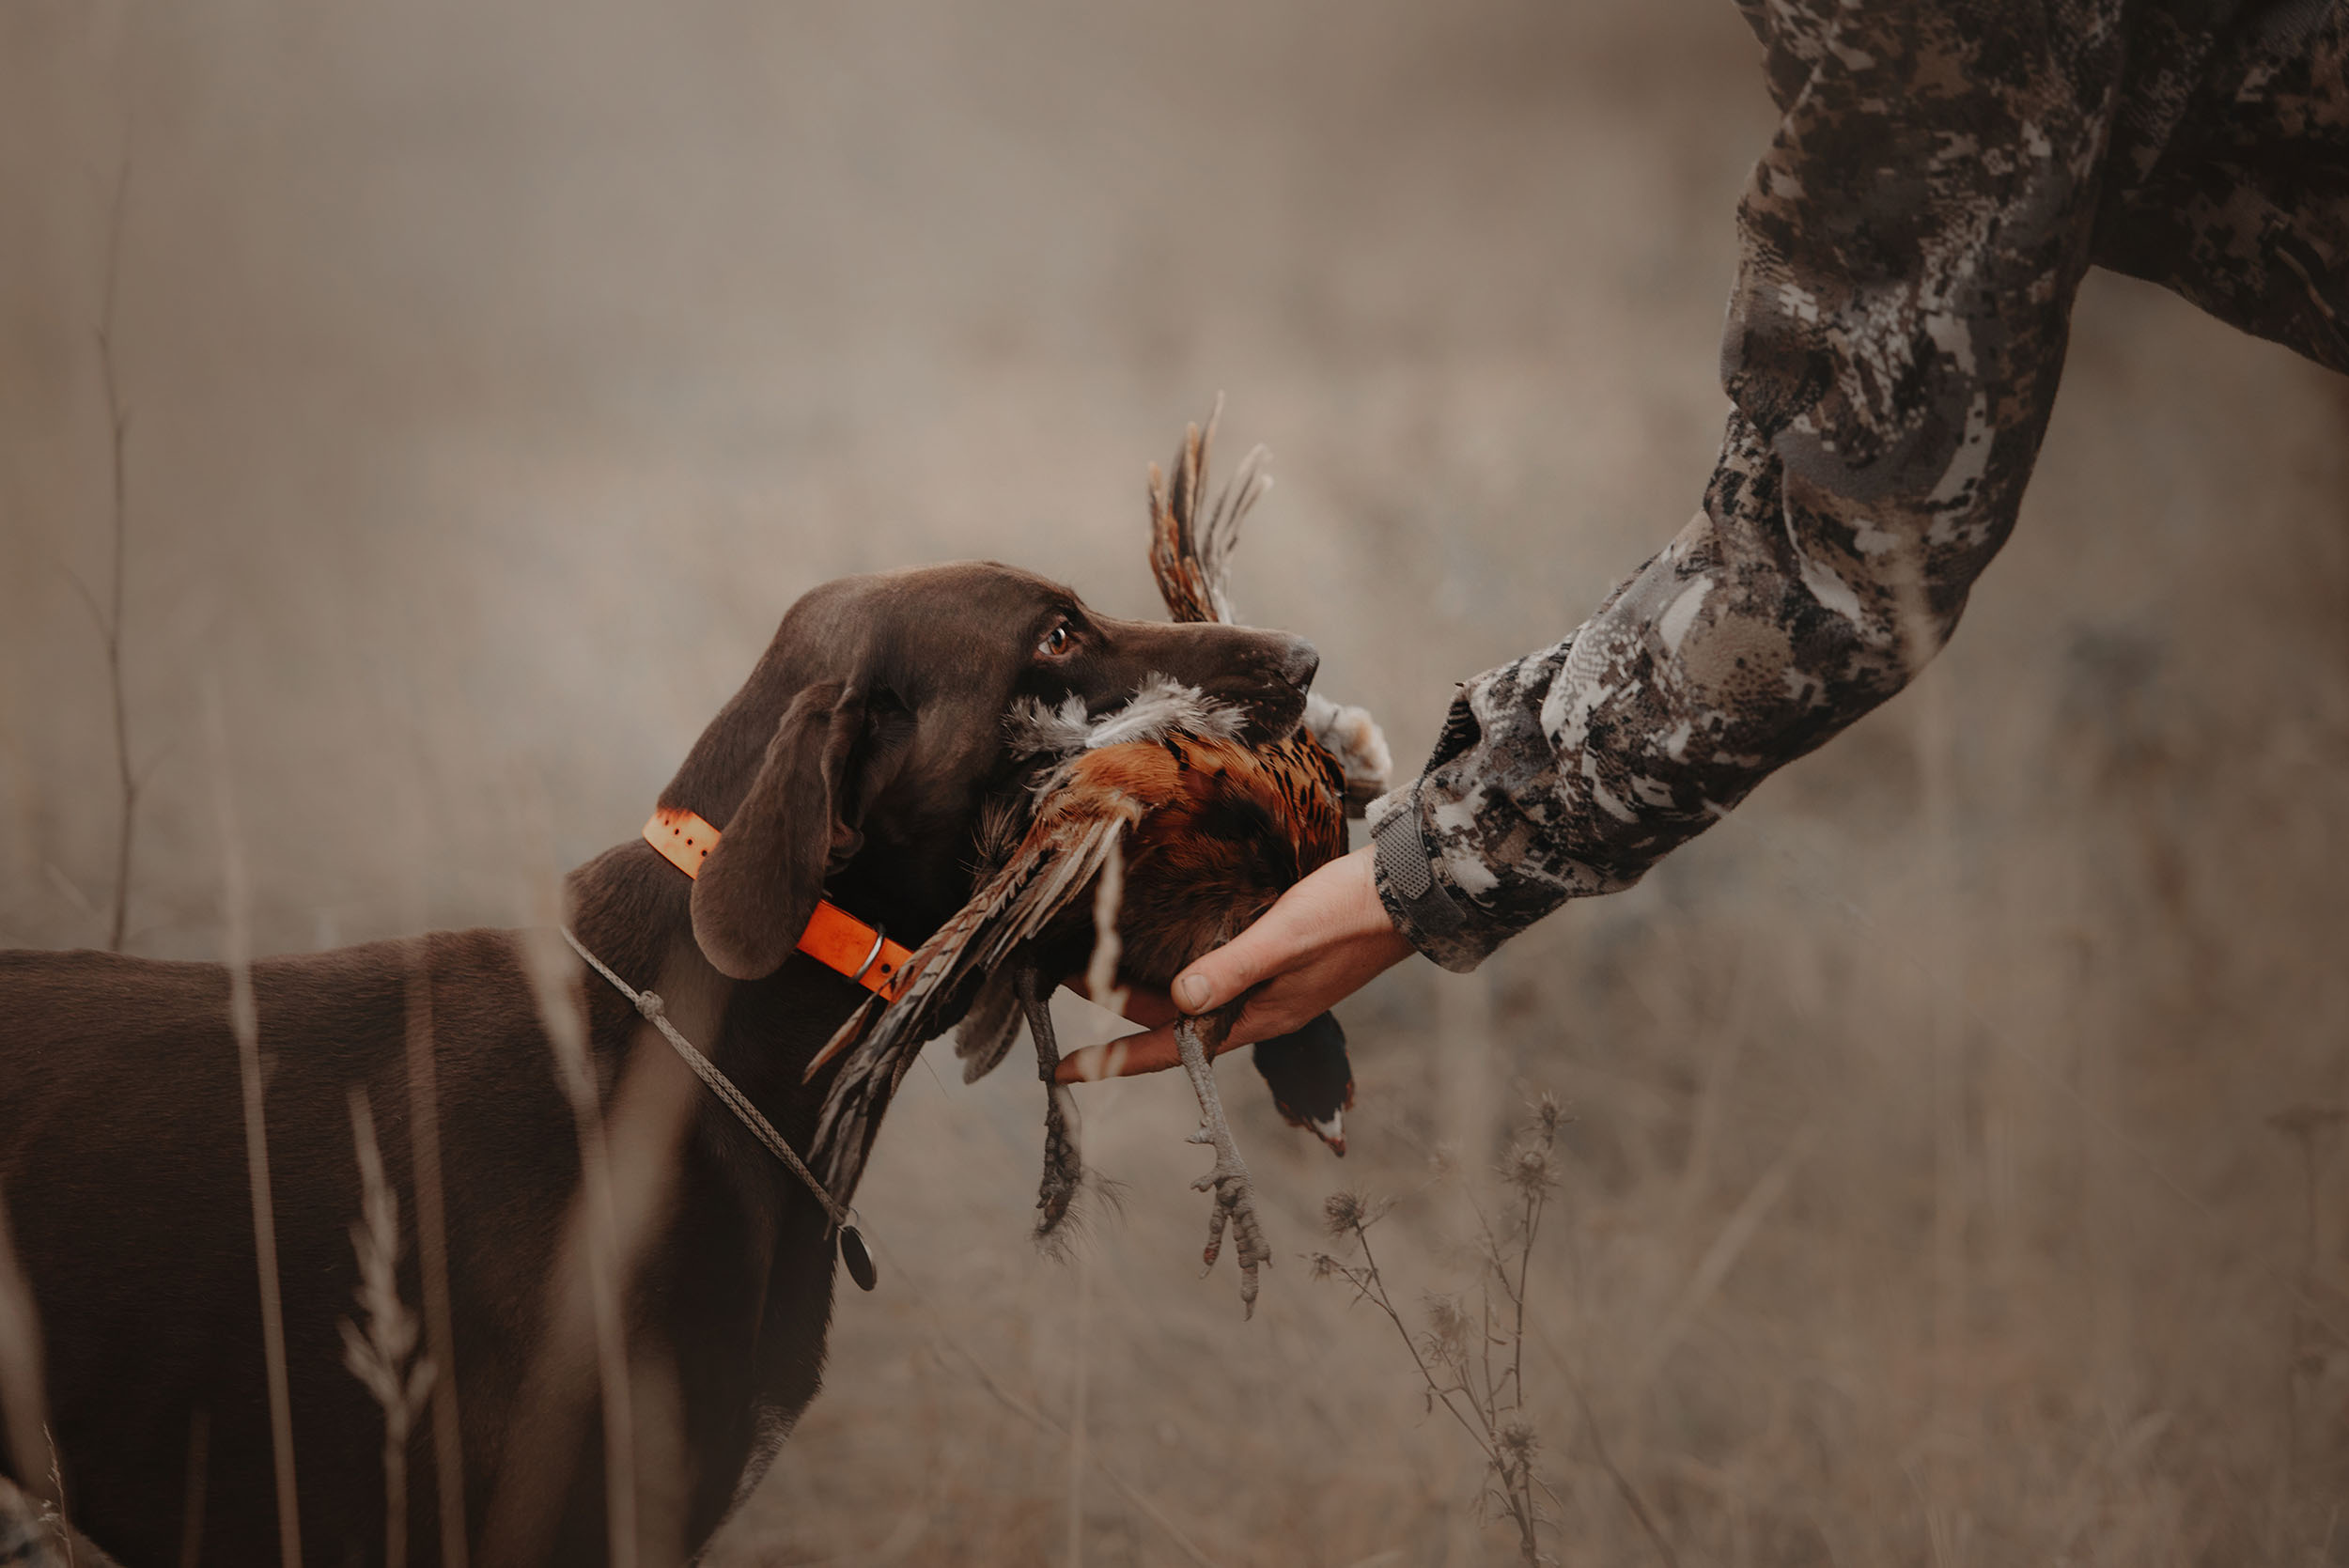 Royal Stag Preserve hunting dog gives pheasant game to owner